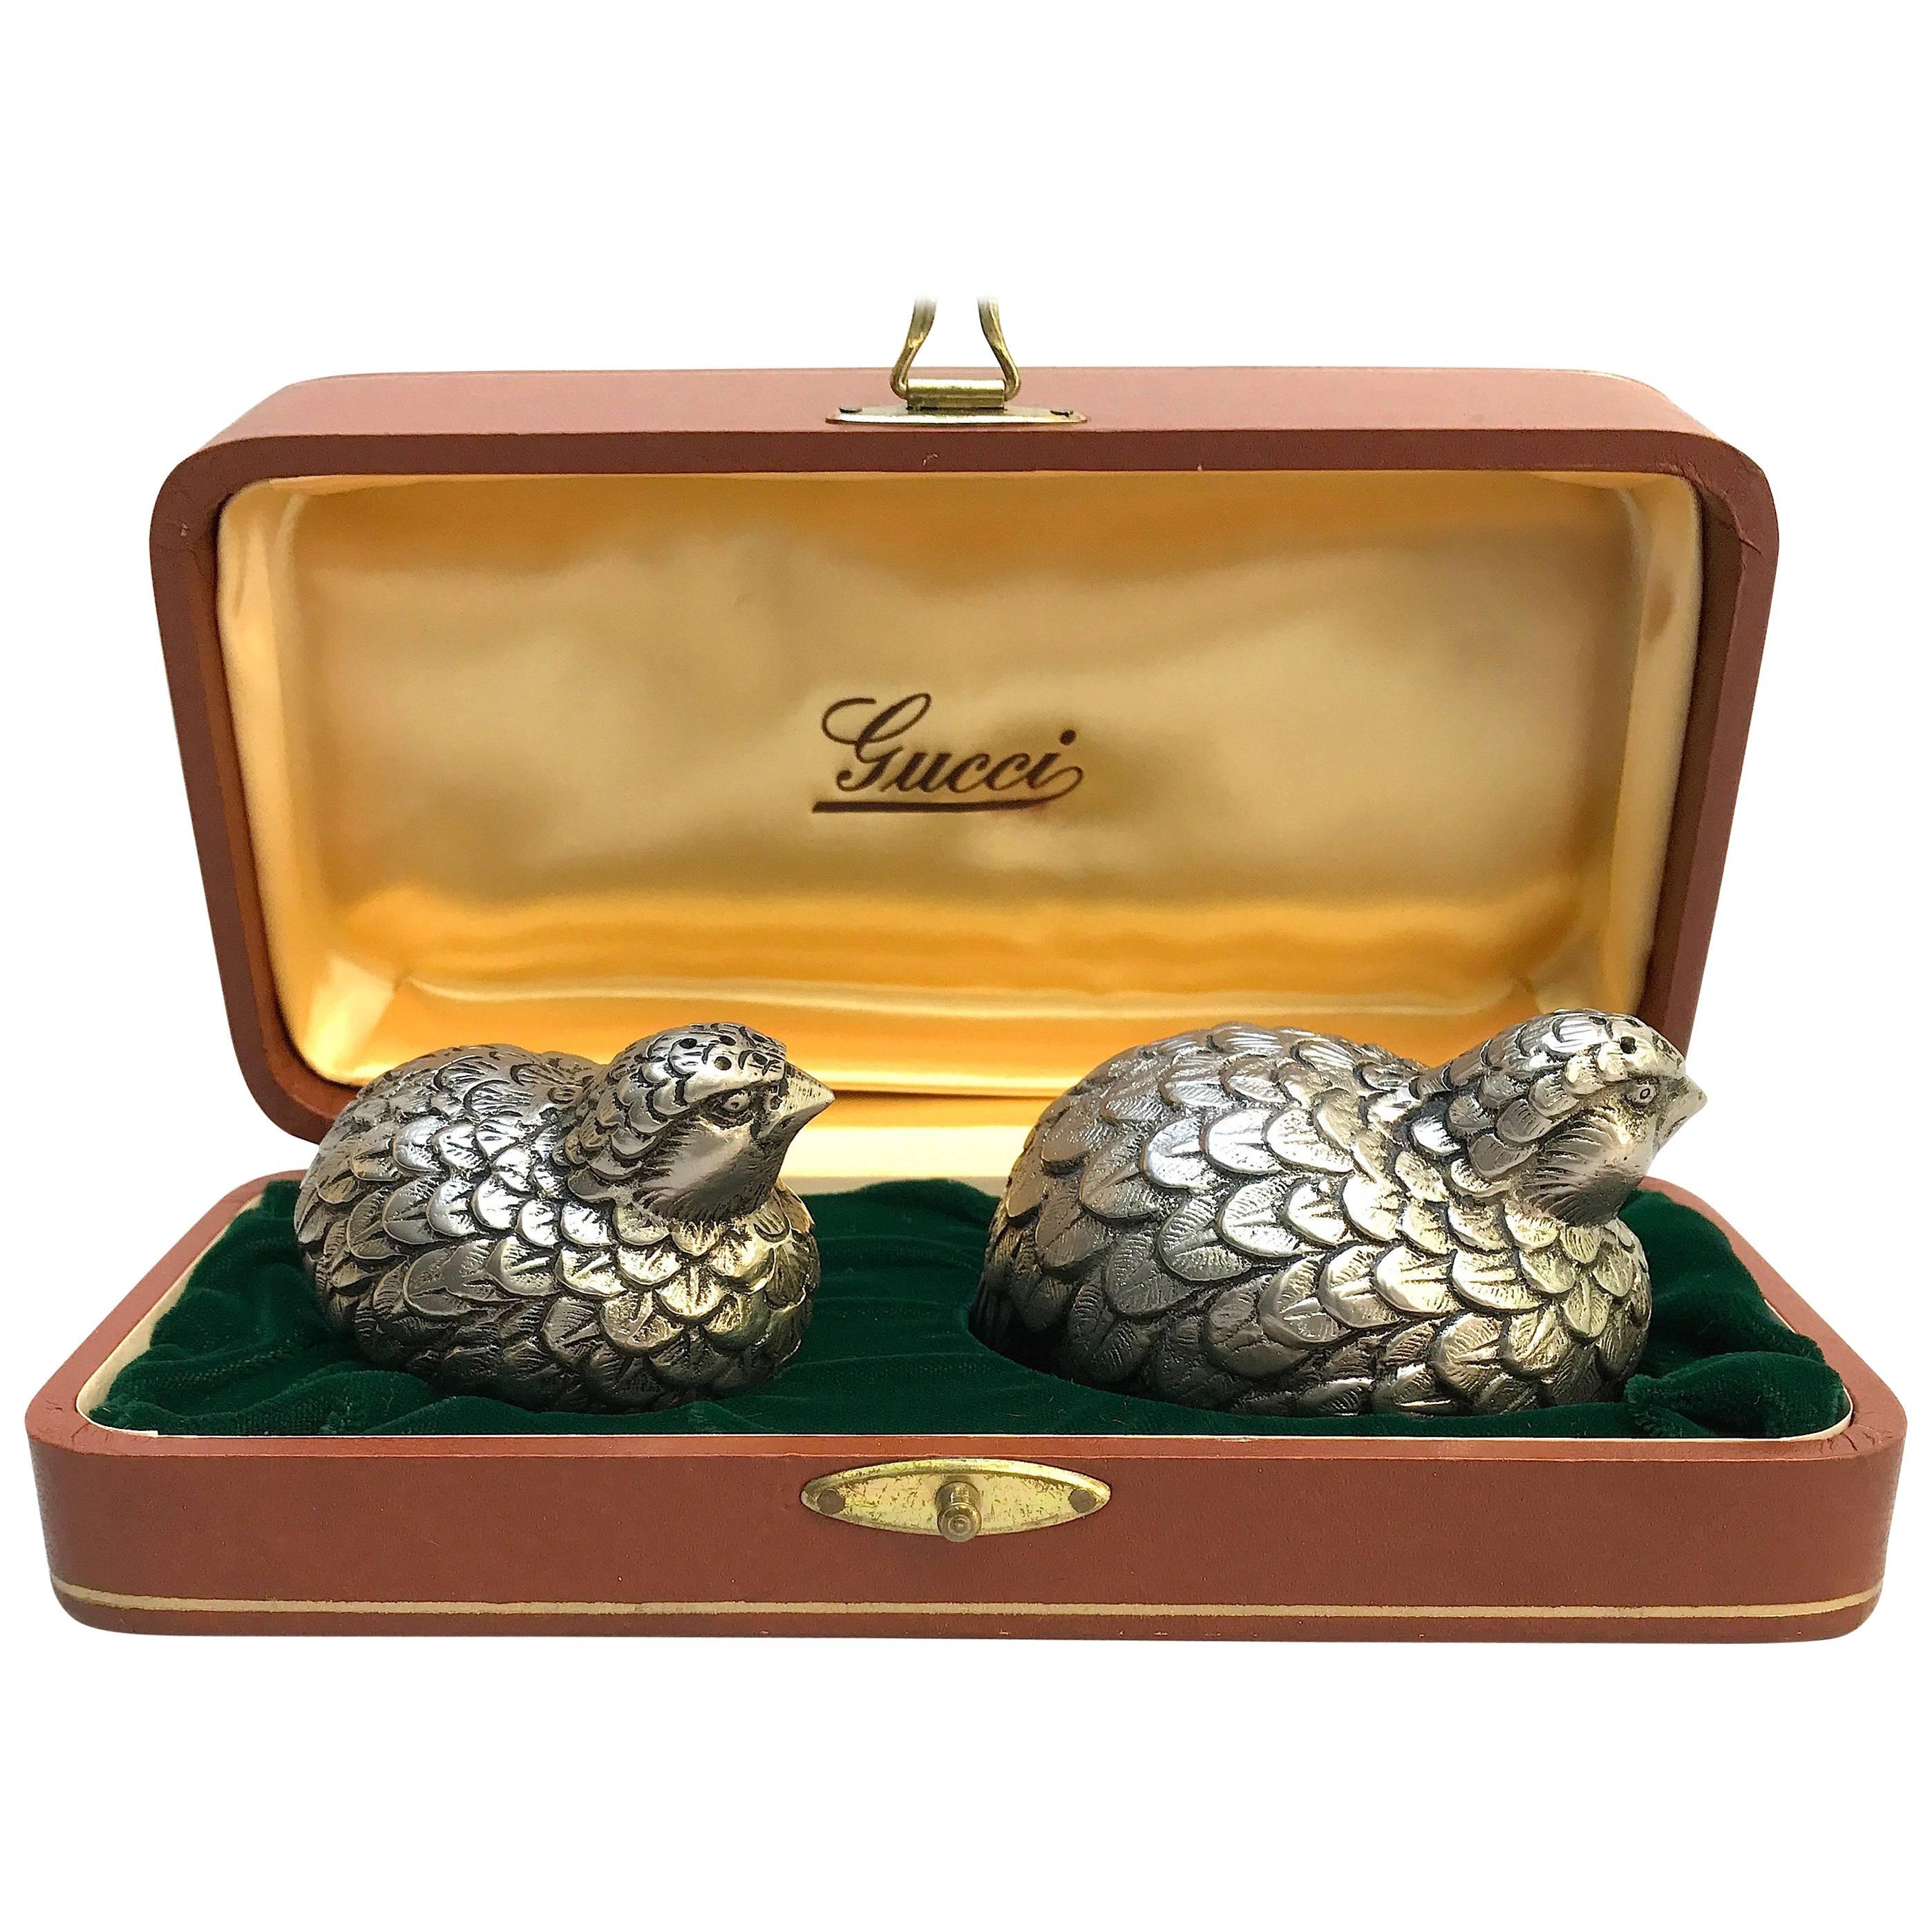 Gucci Vintage Salt and Pepper Shakers Gift Box Silver Plated Pewter Quails